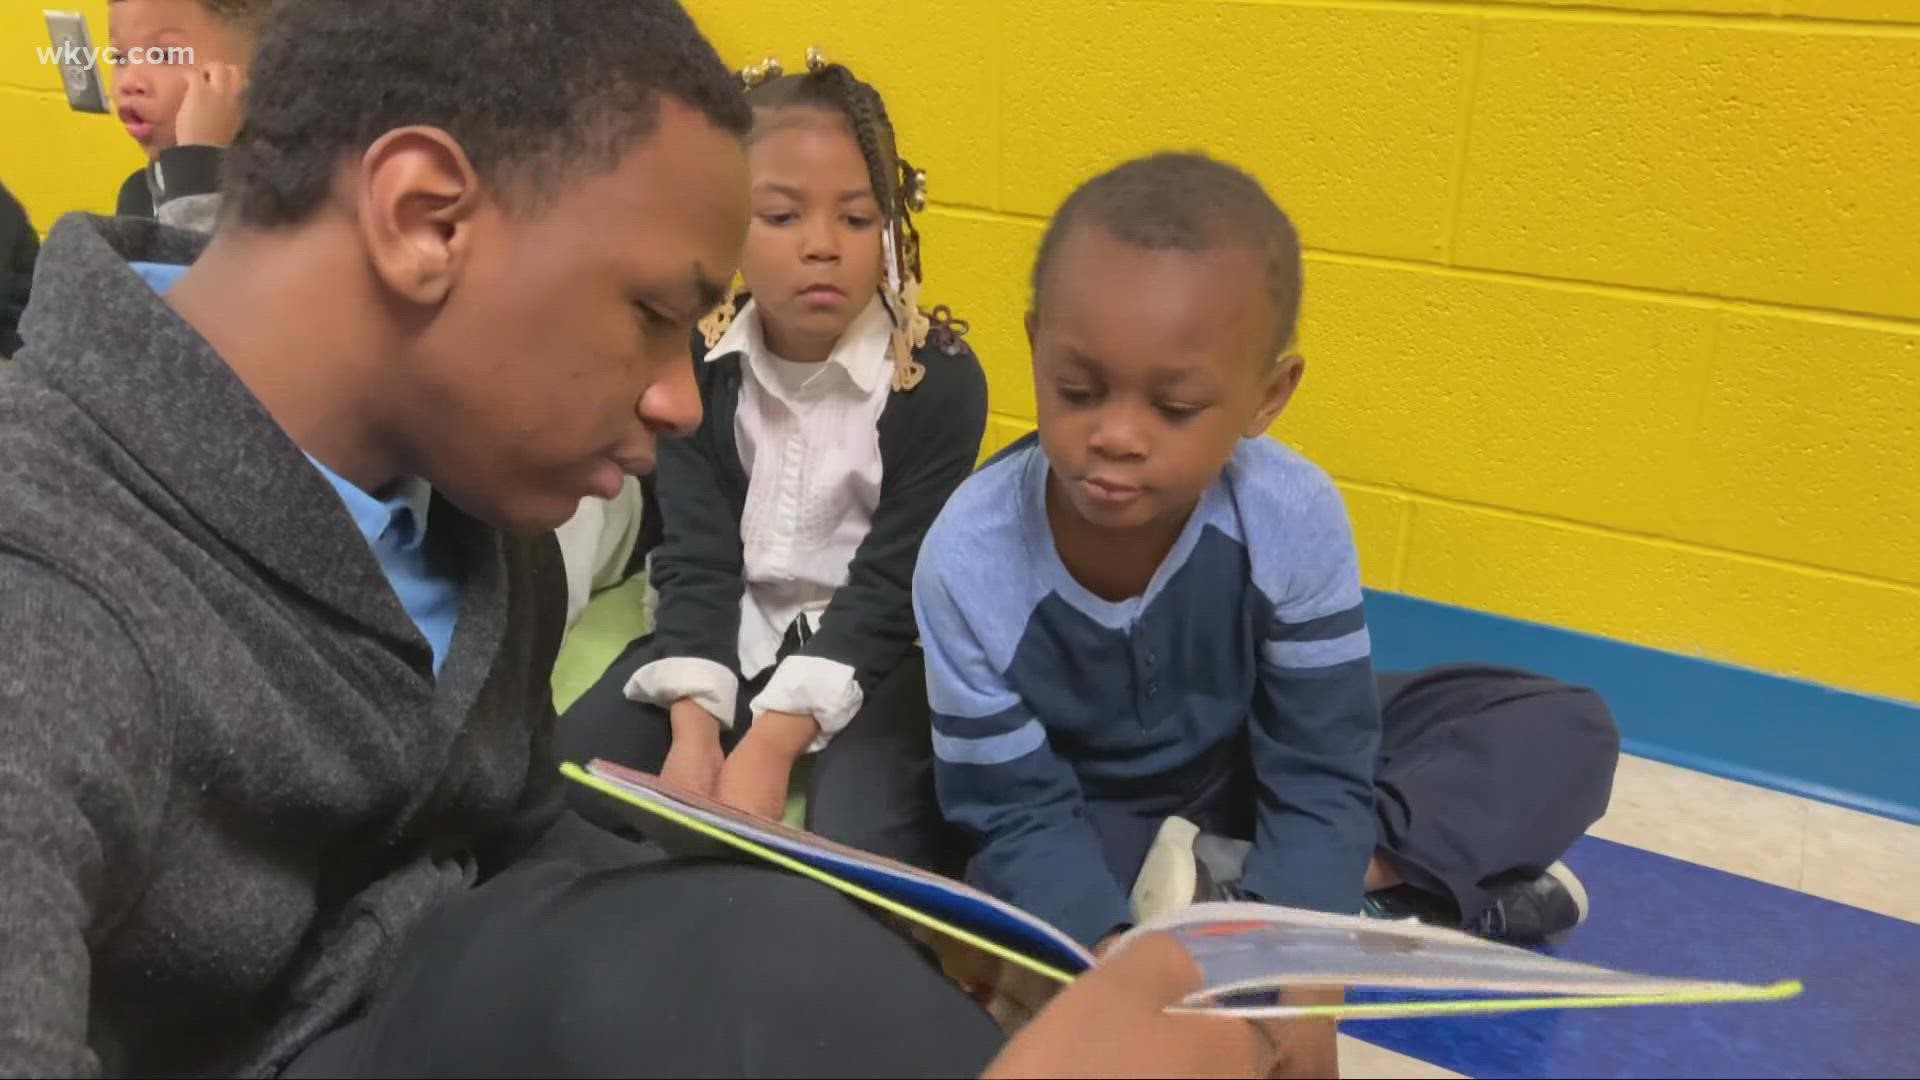 The volunteer-driven effort helps 2nd- and 3rd-graders at Cleveland's Charles Dickens School develop reading proficiency. The program is spearheaded by WKYC Studios.